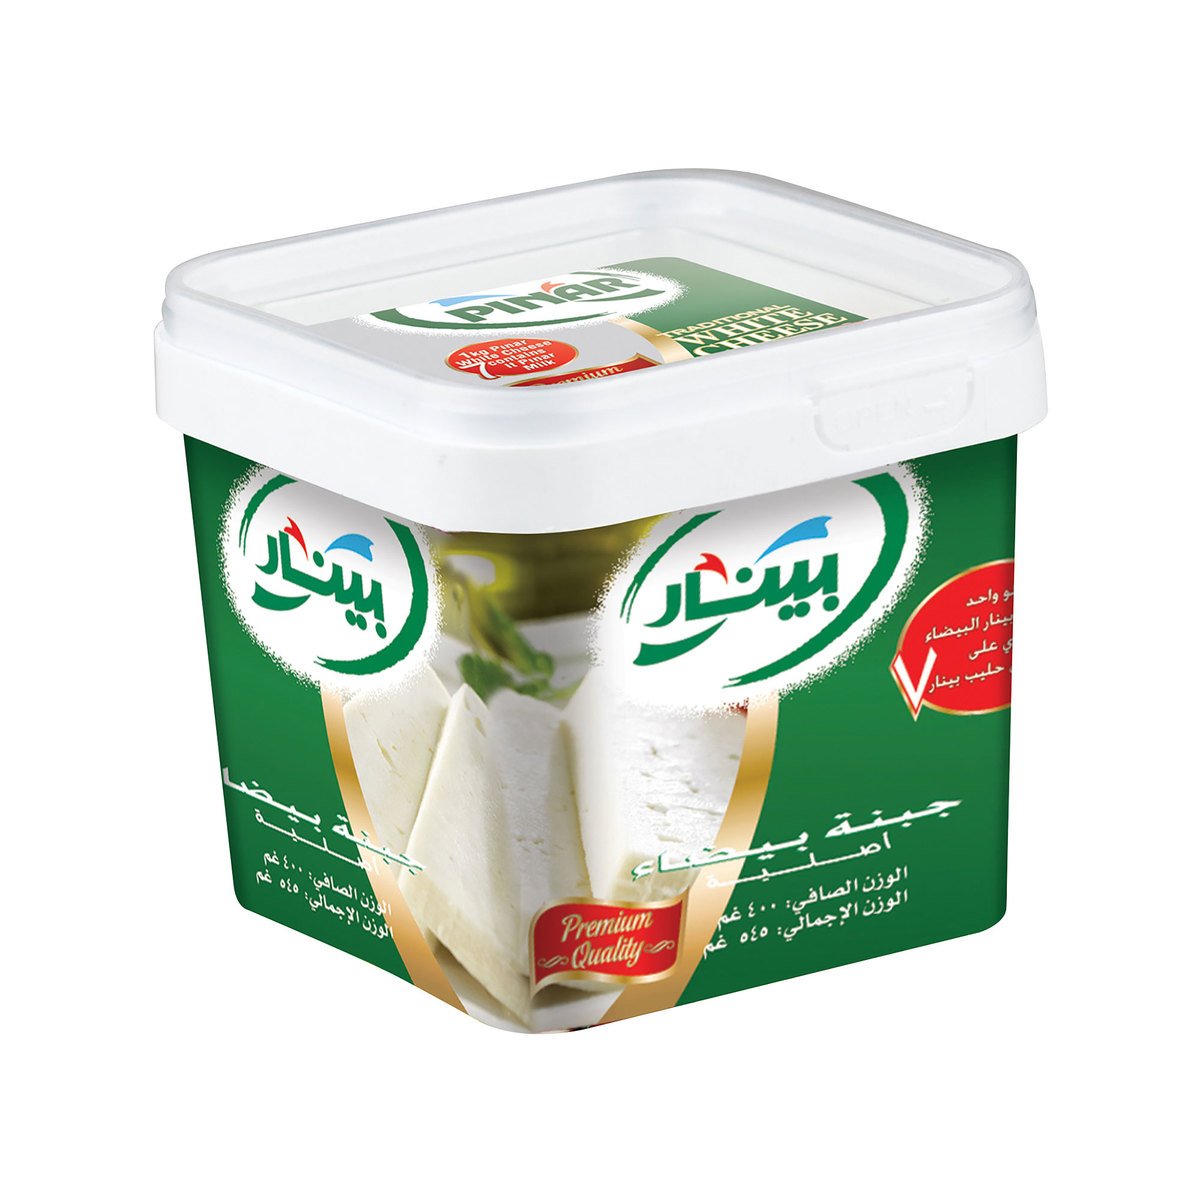 Pinar Traditional White Cheese 400 g